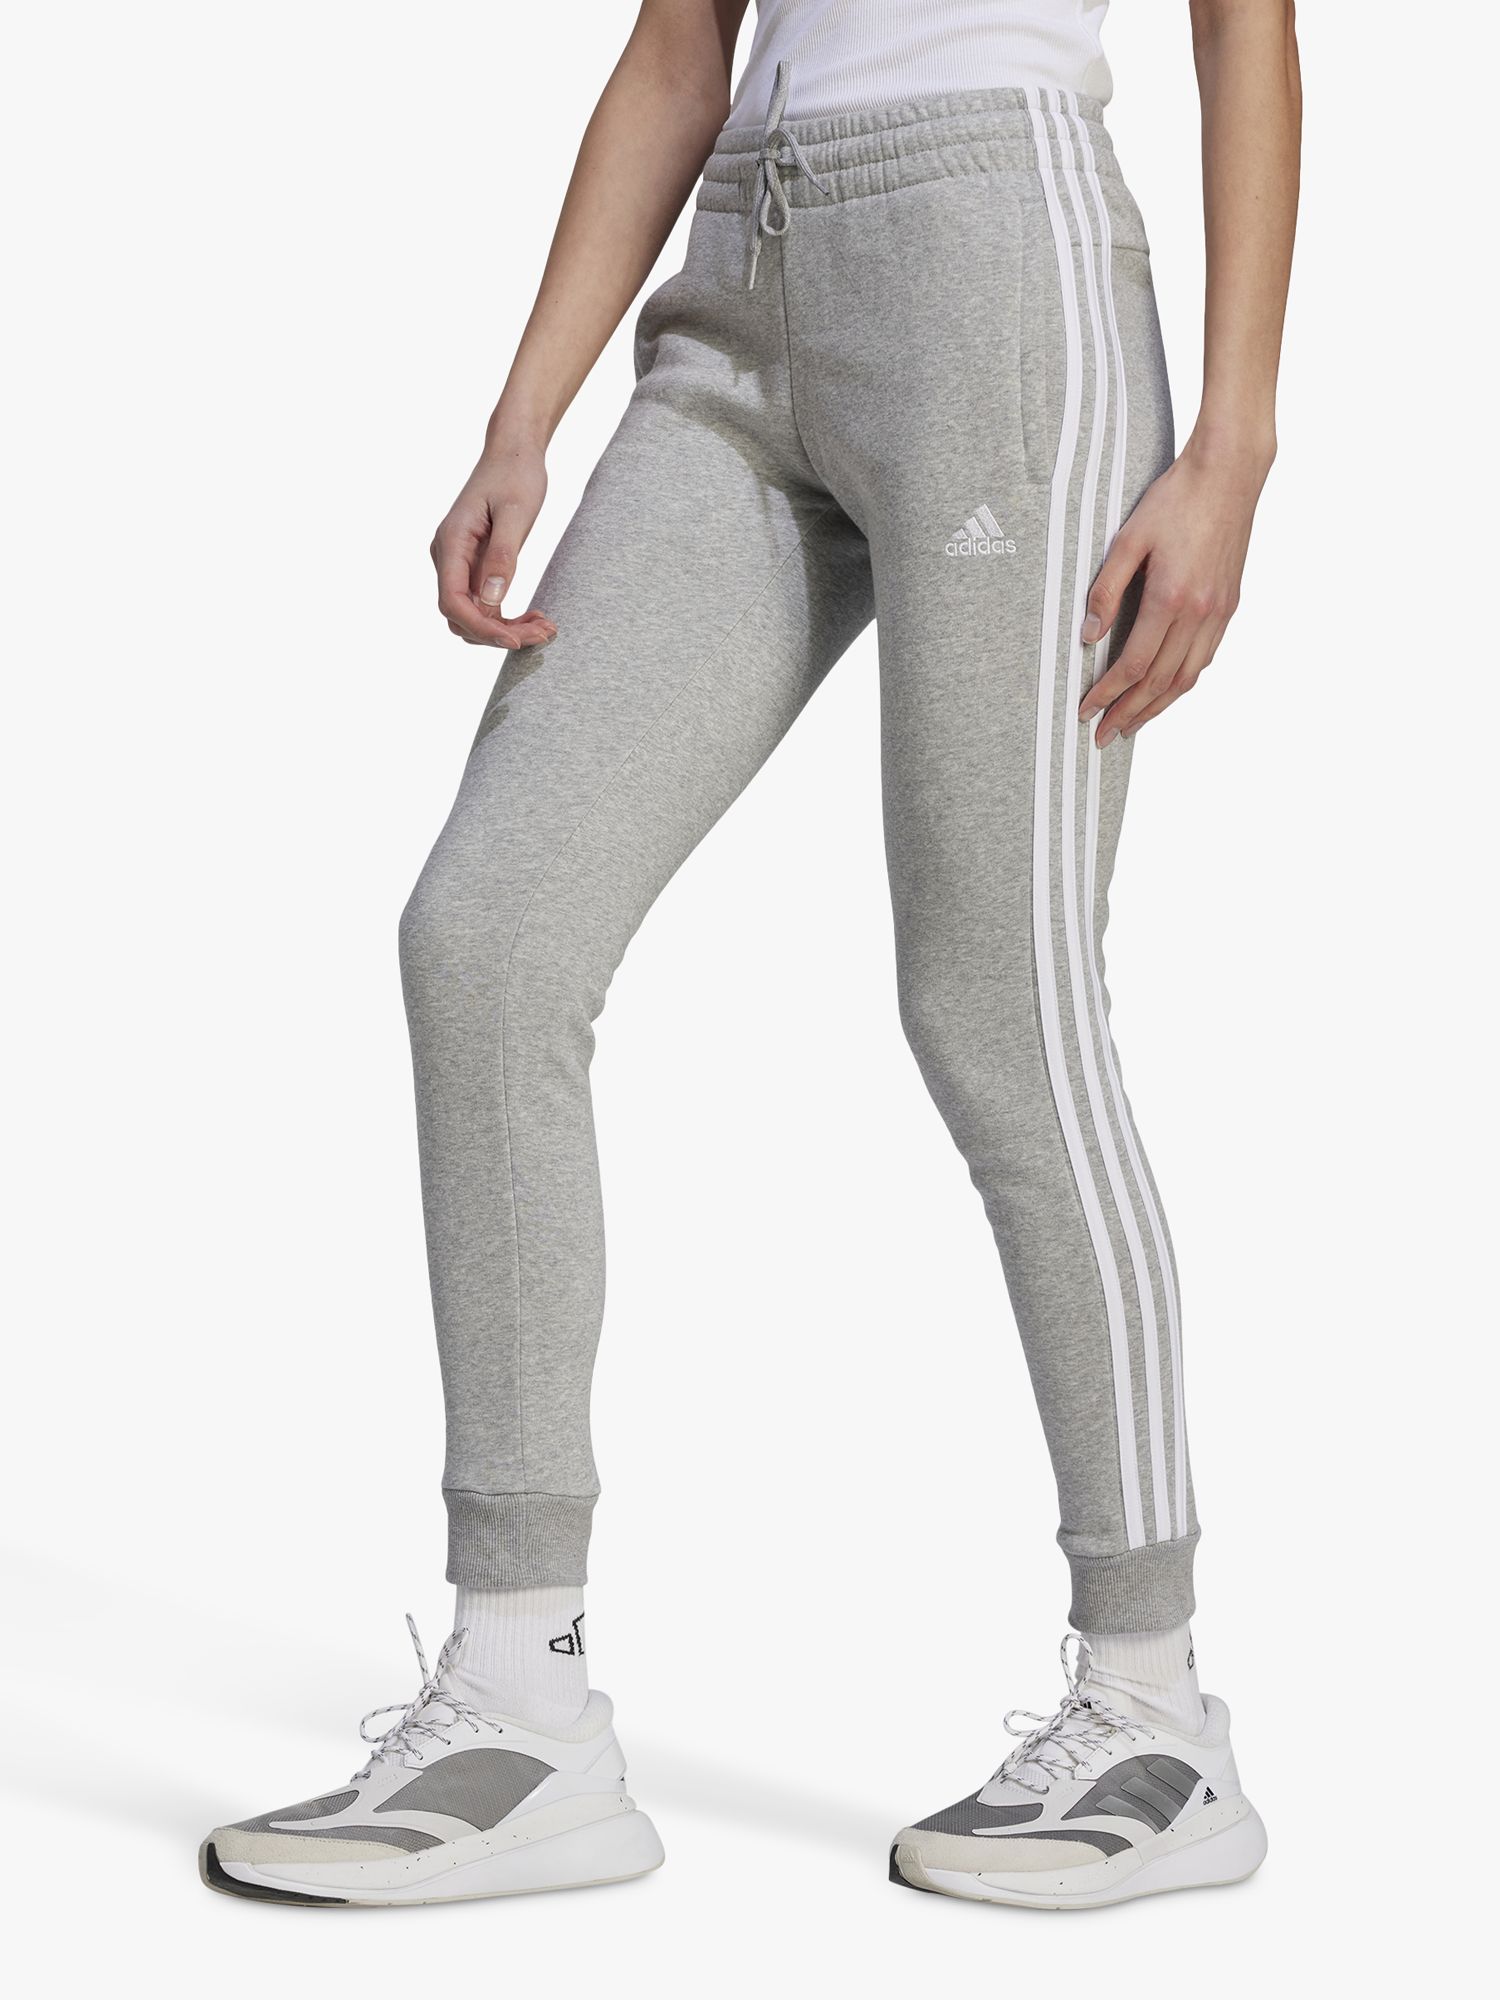 adidas Essentials 3 Stripes Grey Partners John Heather/White Lewis Joggers, at Terry & French